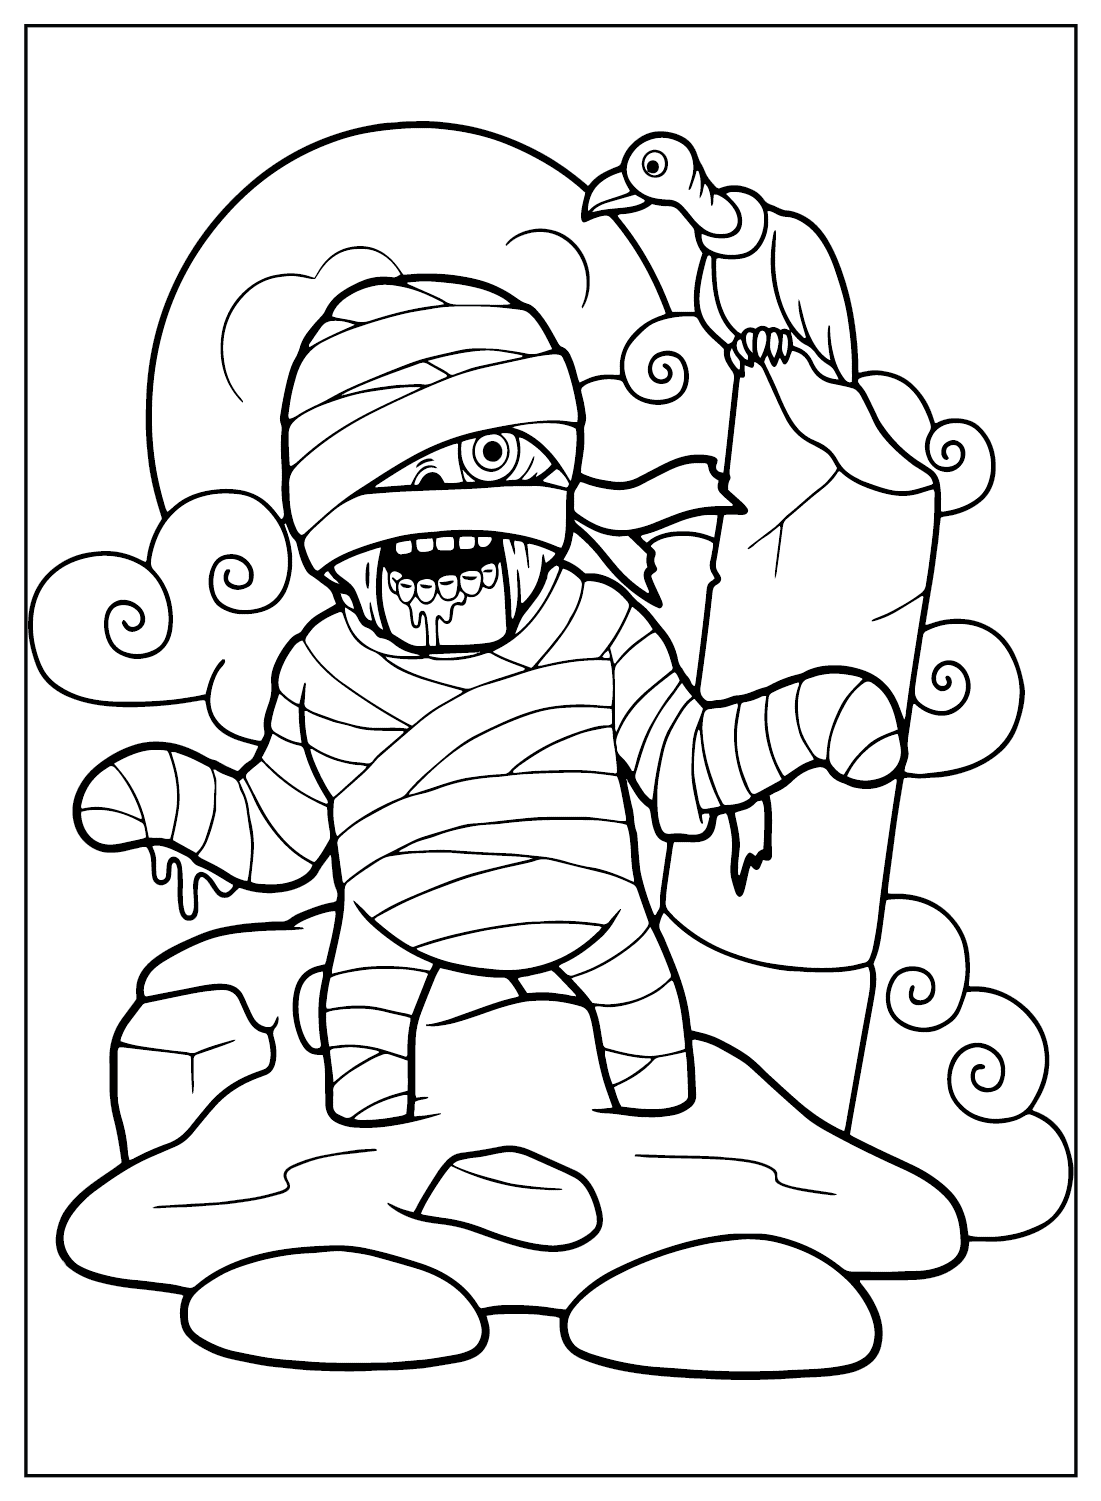 Mummy Coloring Pages to Printable